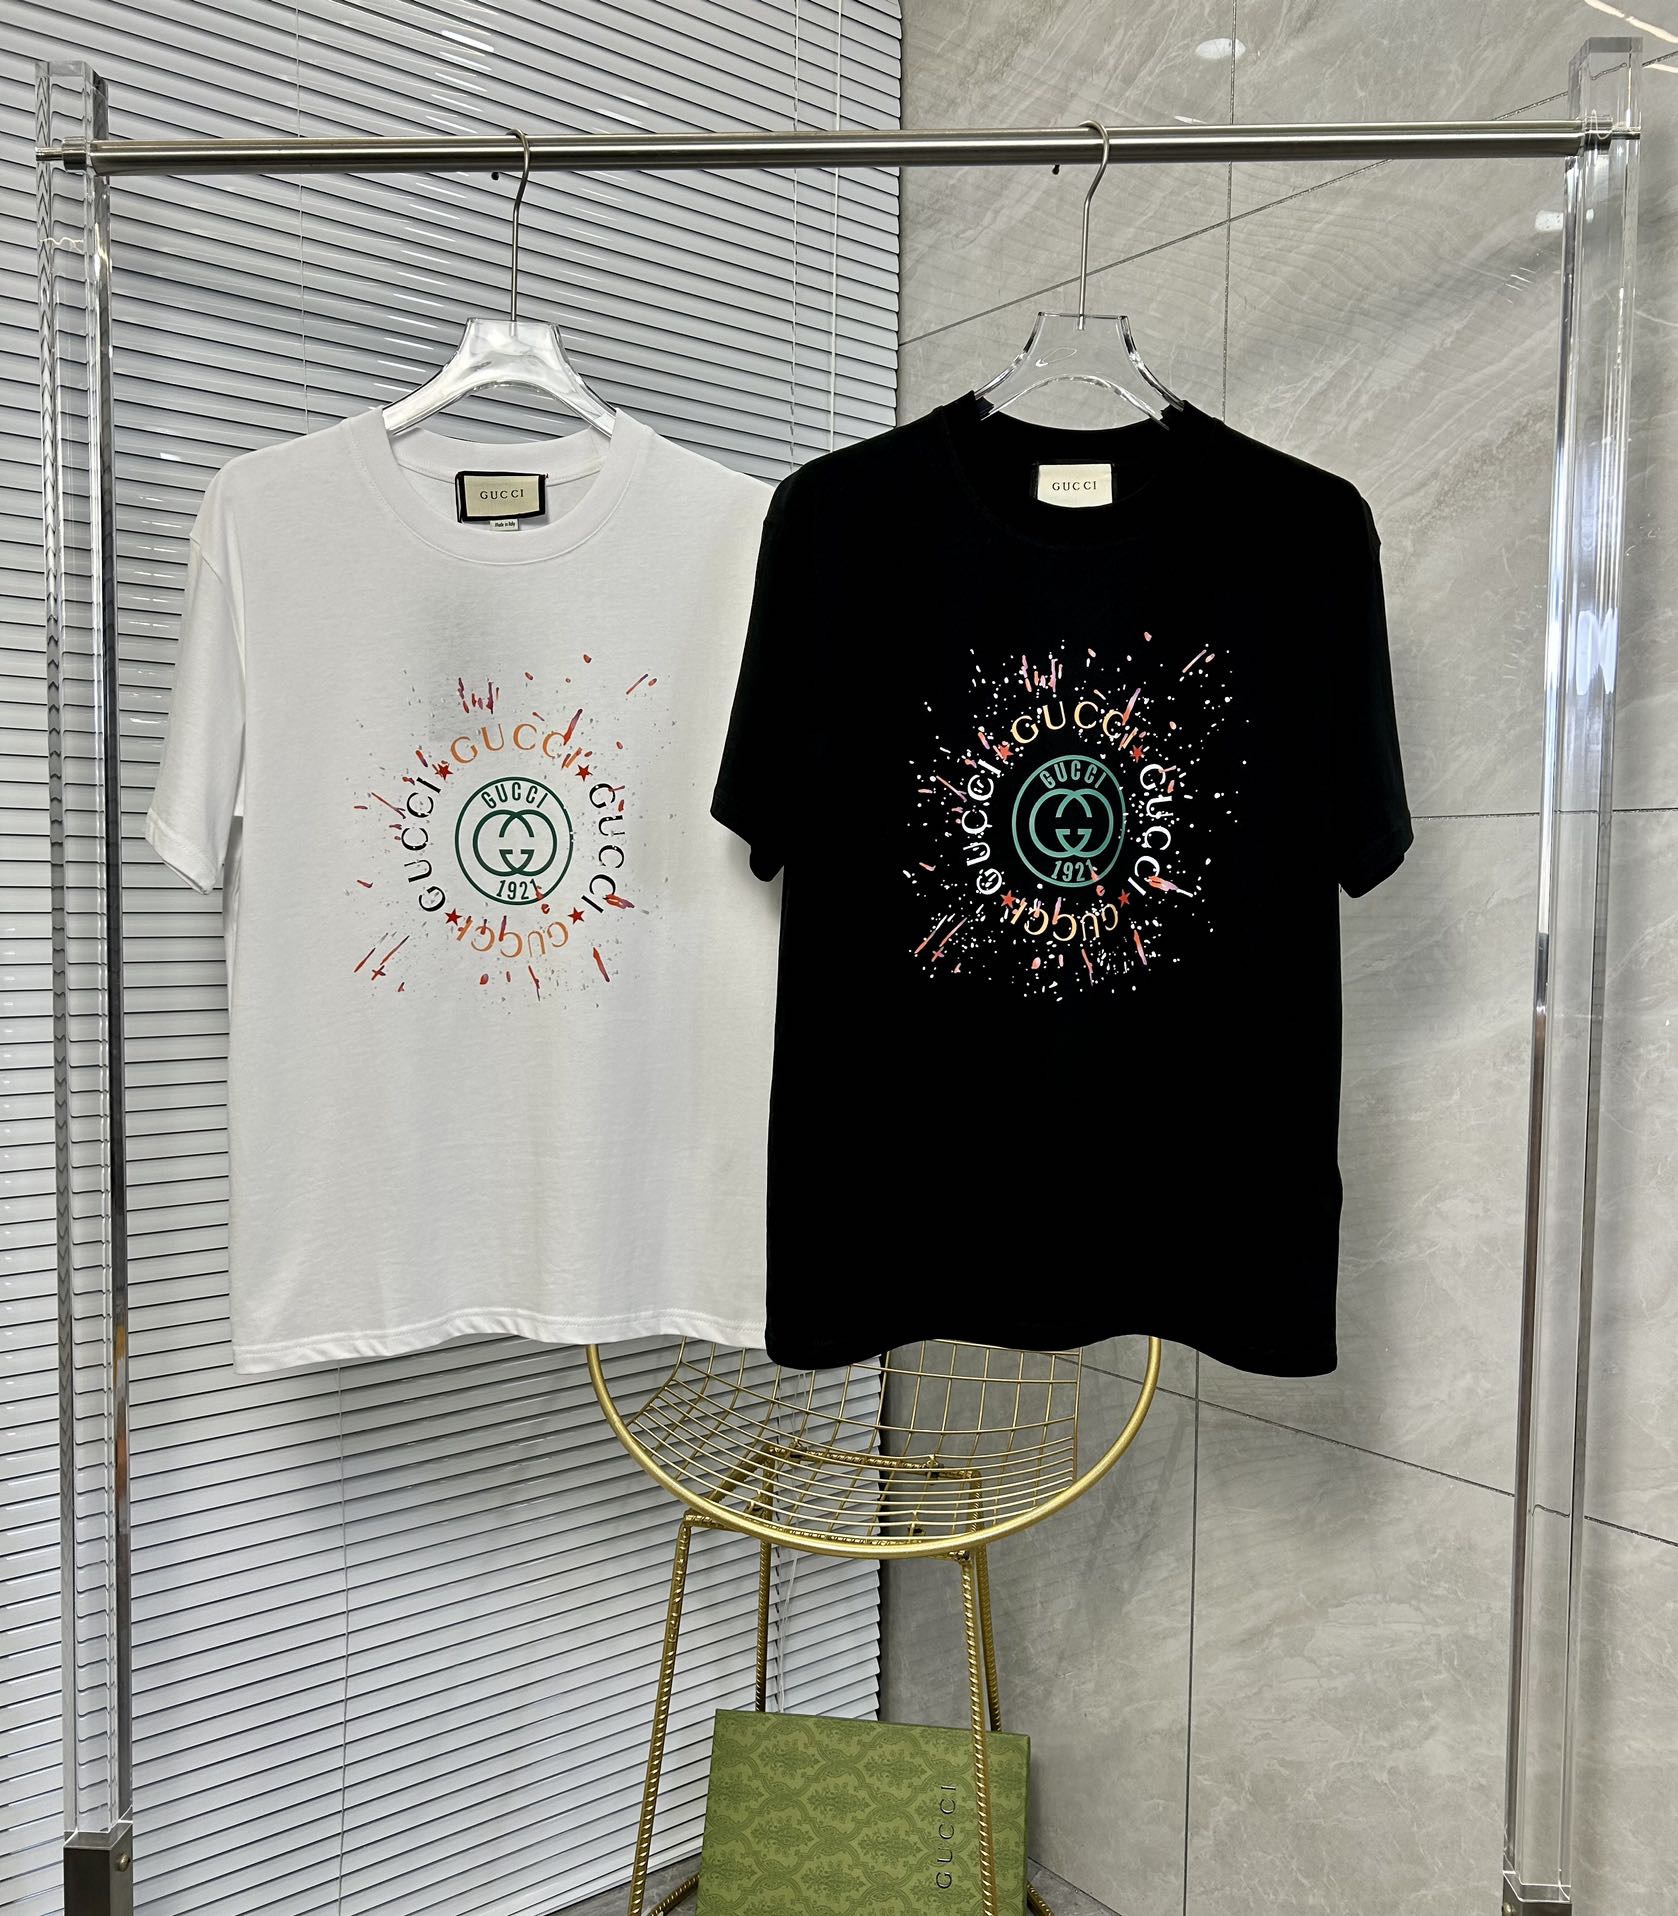 Gucci Clothing T-Shirt Black Doodle White Printing Unisex Men Spring/Summer Collection Fashion Short Sleeve